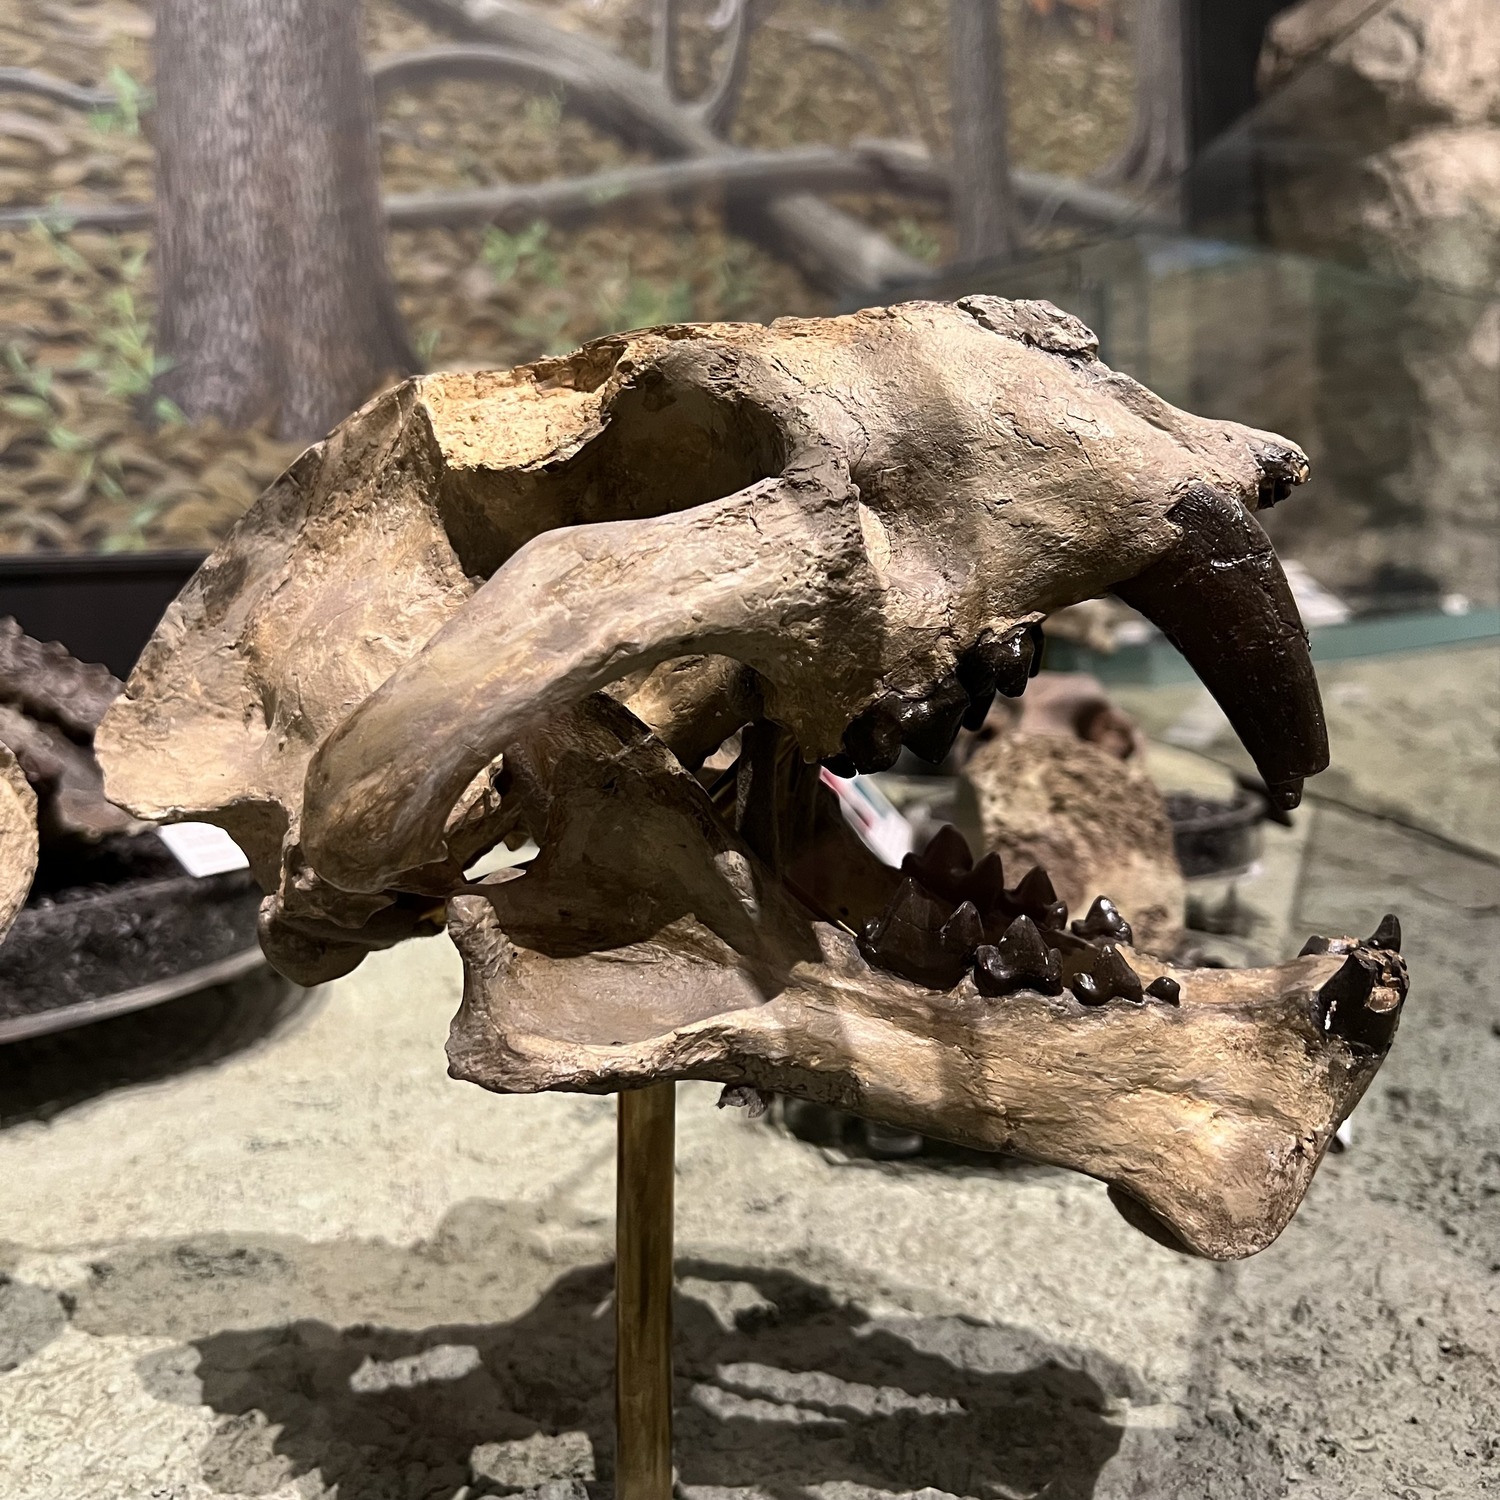 the John Day "Tiger" skull and jaws fossil